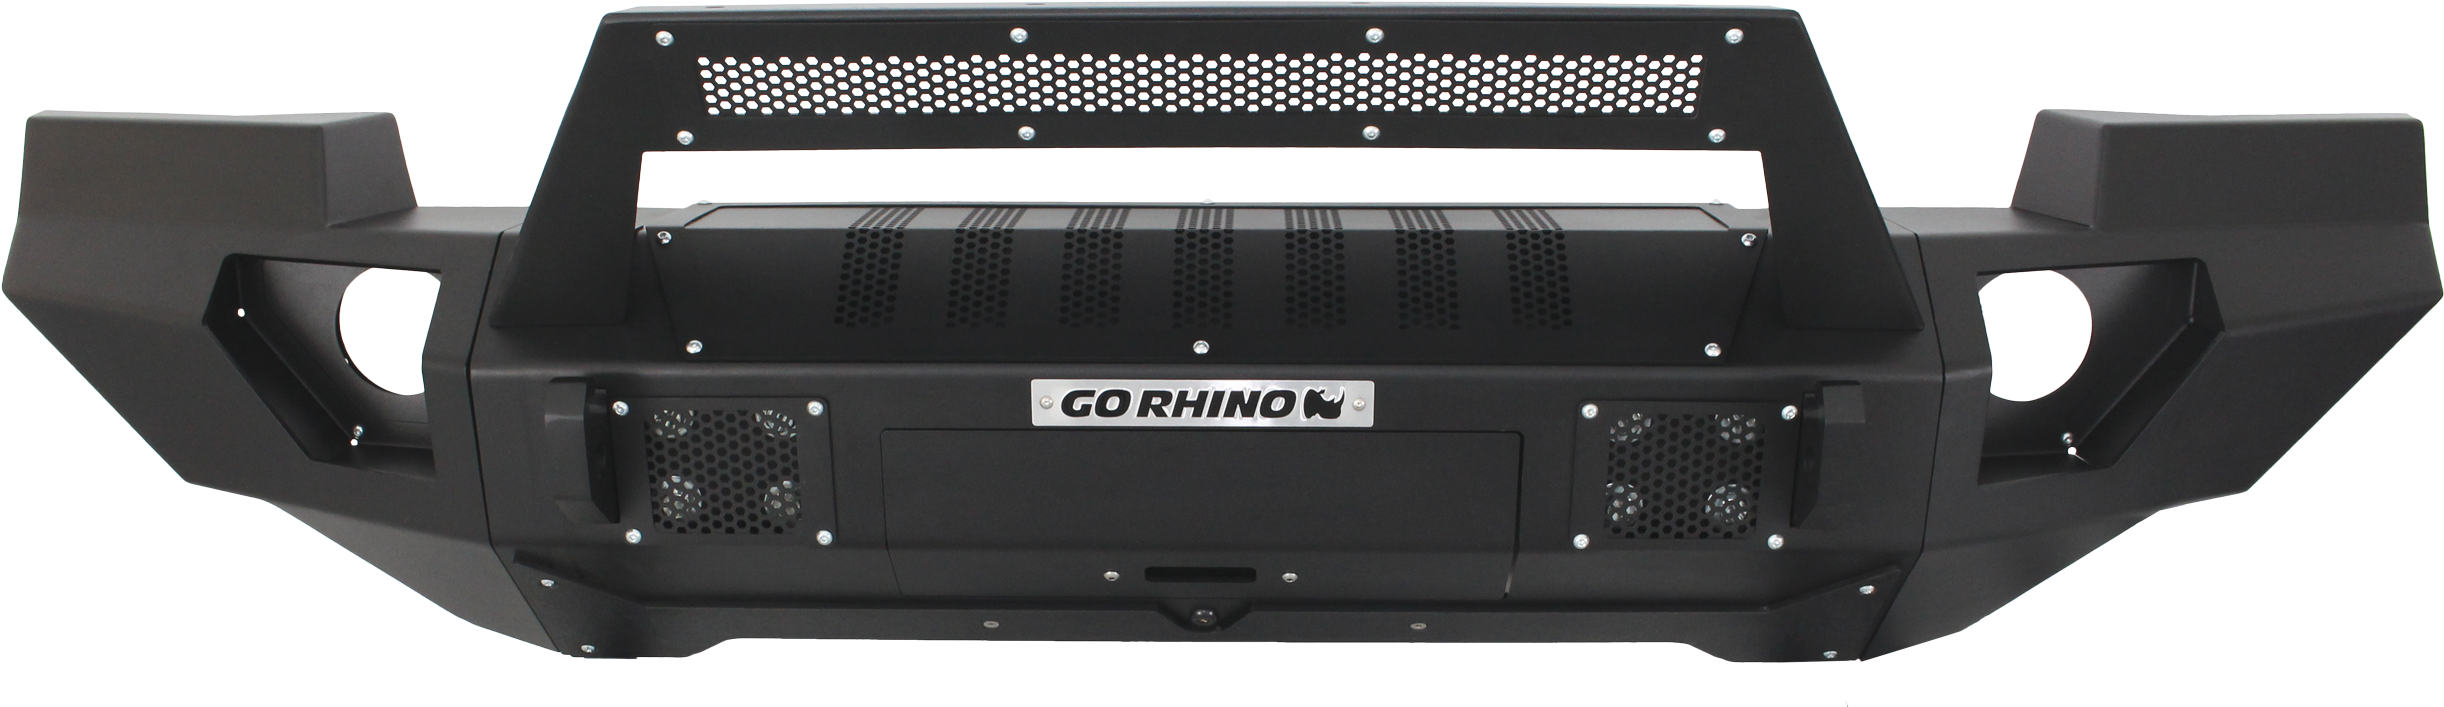 View Larger - Go Rhino Jeep Bumpers (2500x776), Png Download